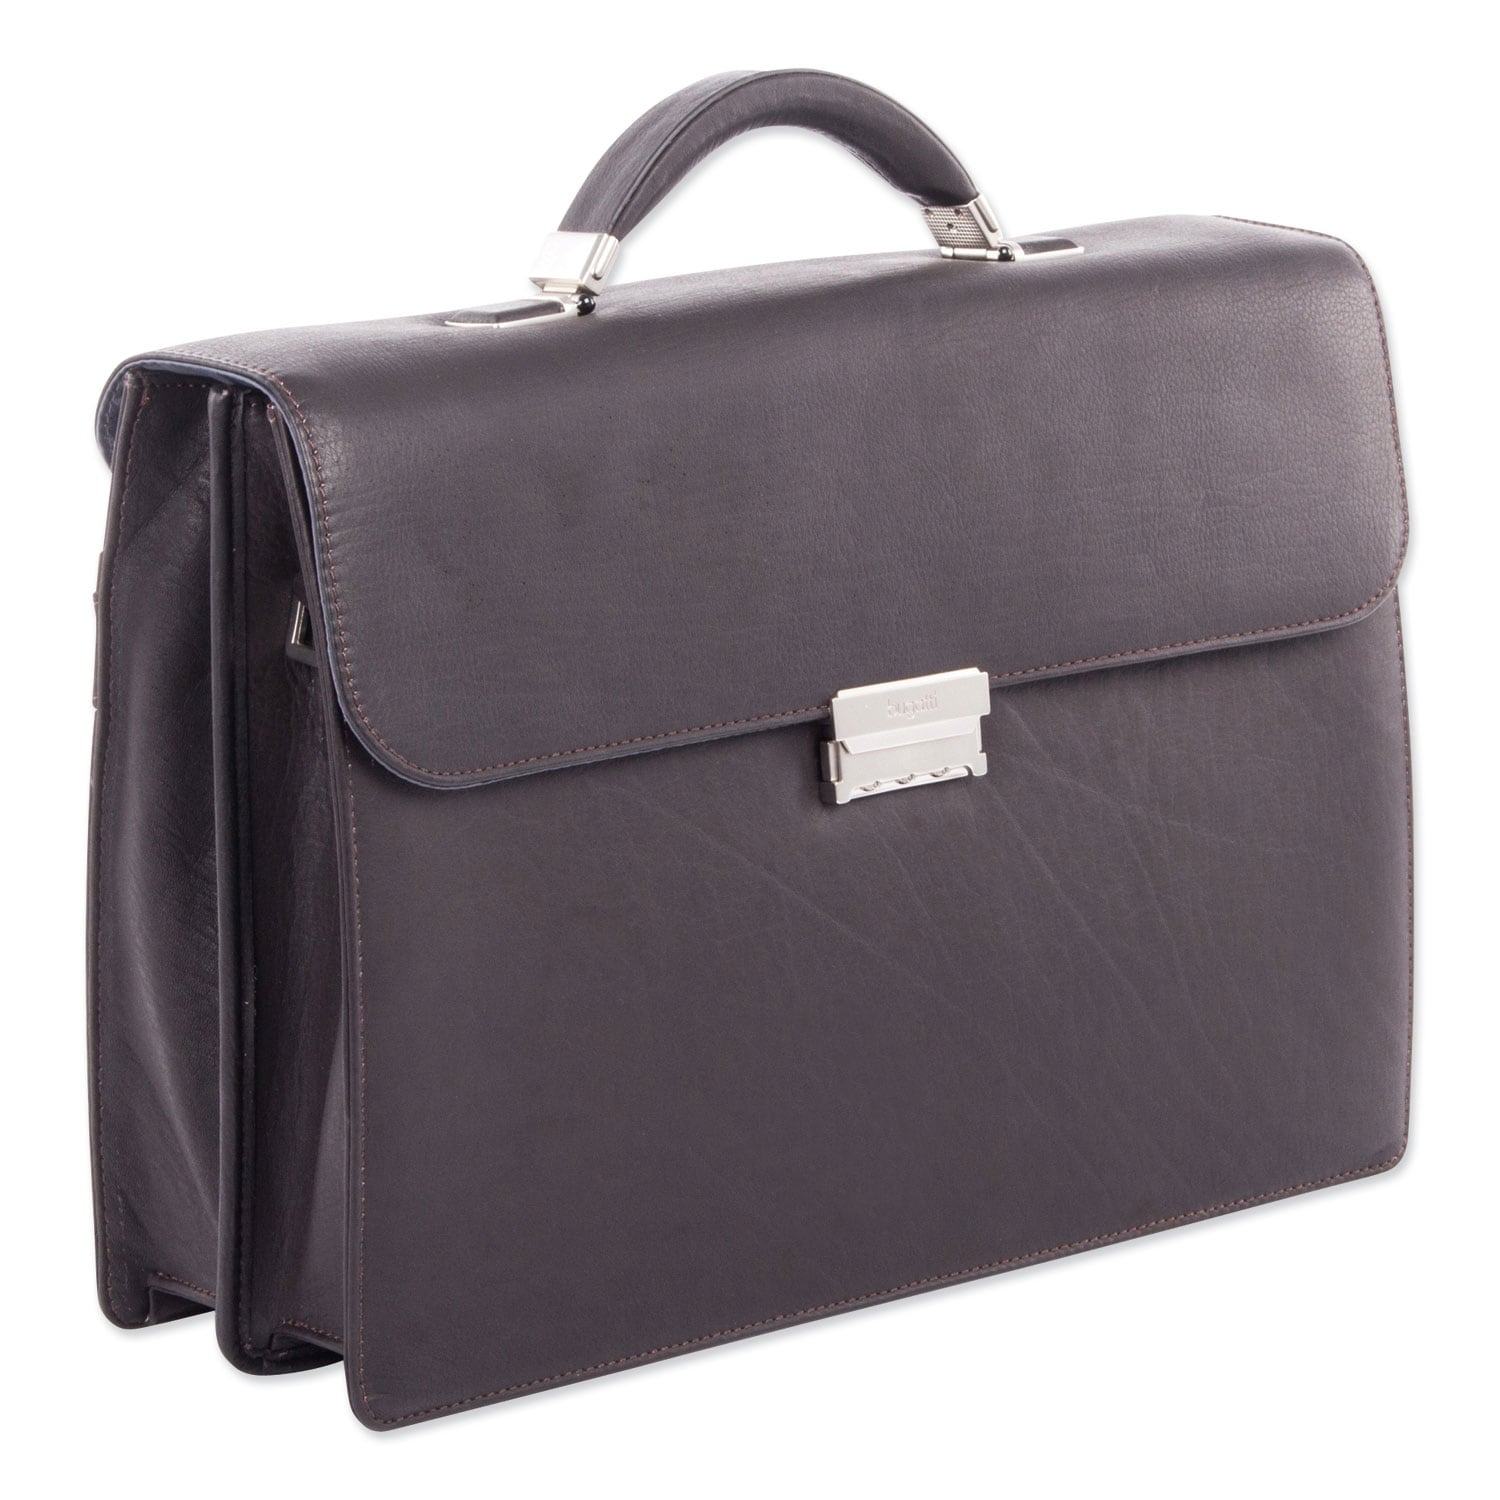 Milestone Briefcase Fits Devices Up to 15.6